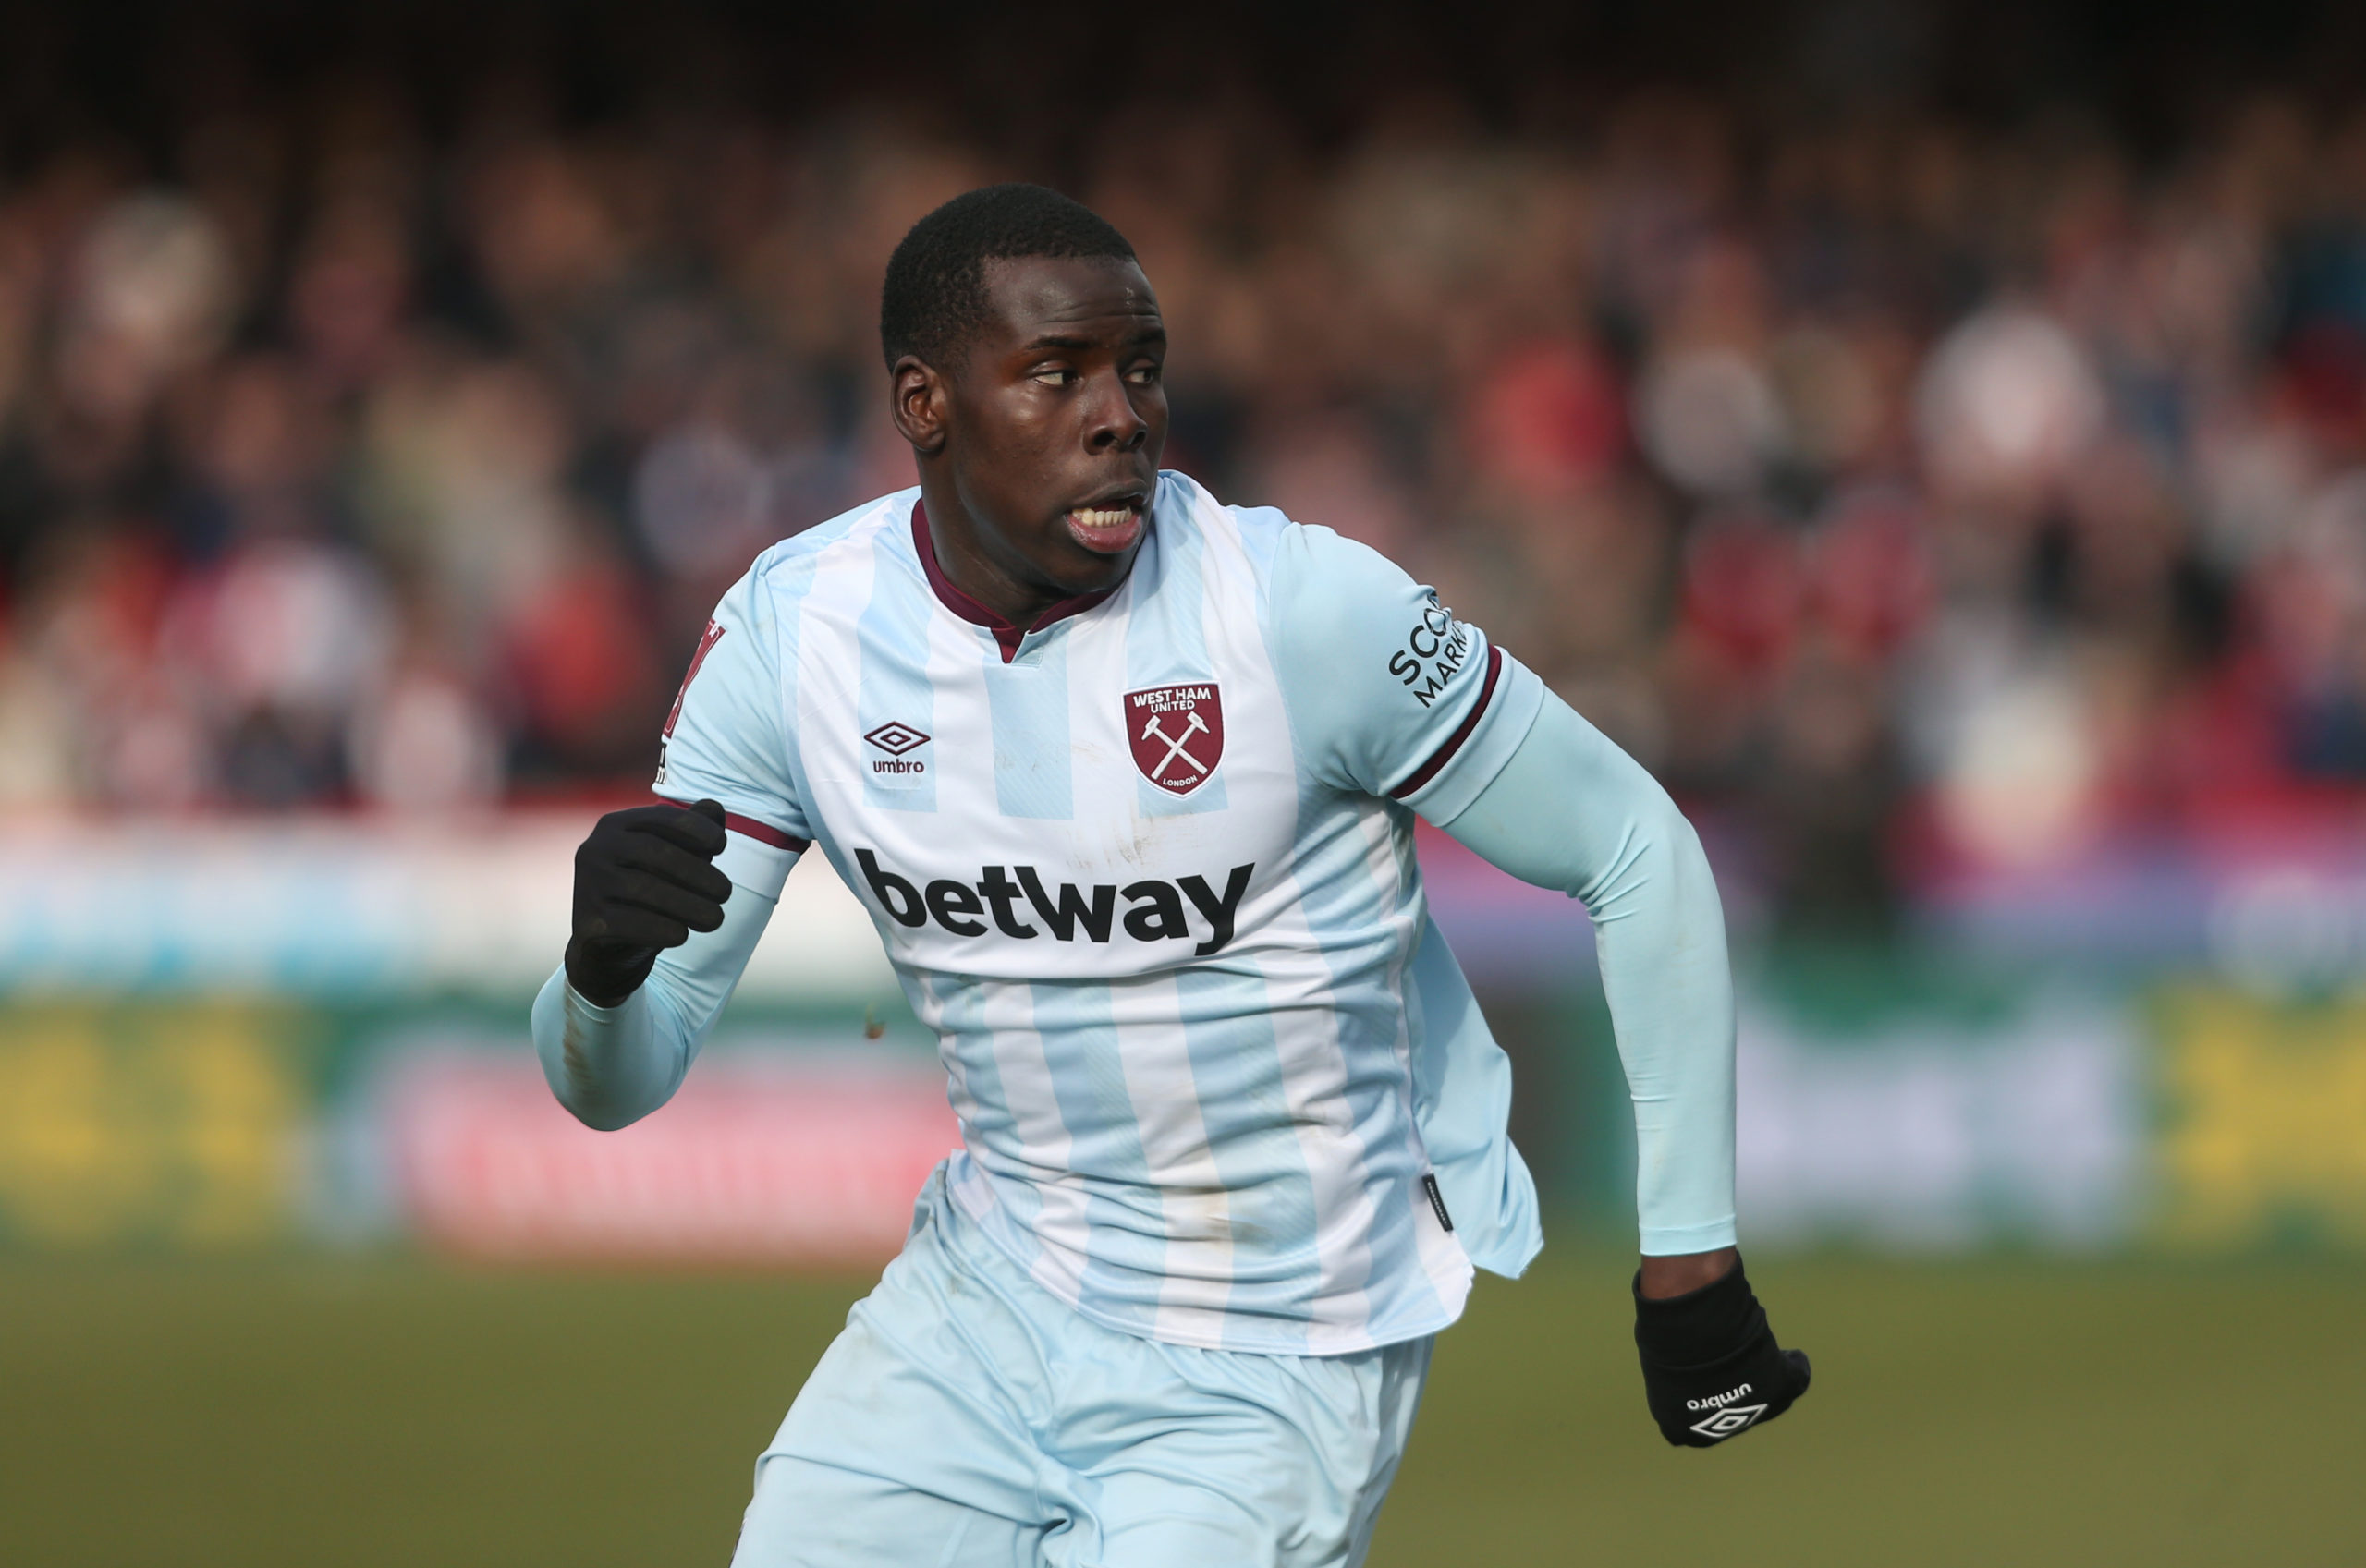 Time to rise for West Ham academy star Aji Alese as Kurt Zouma faces axe